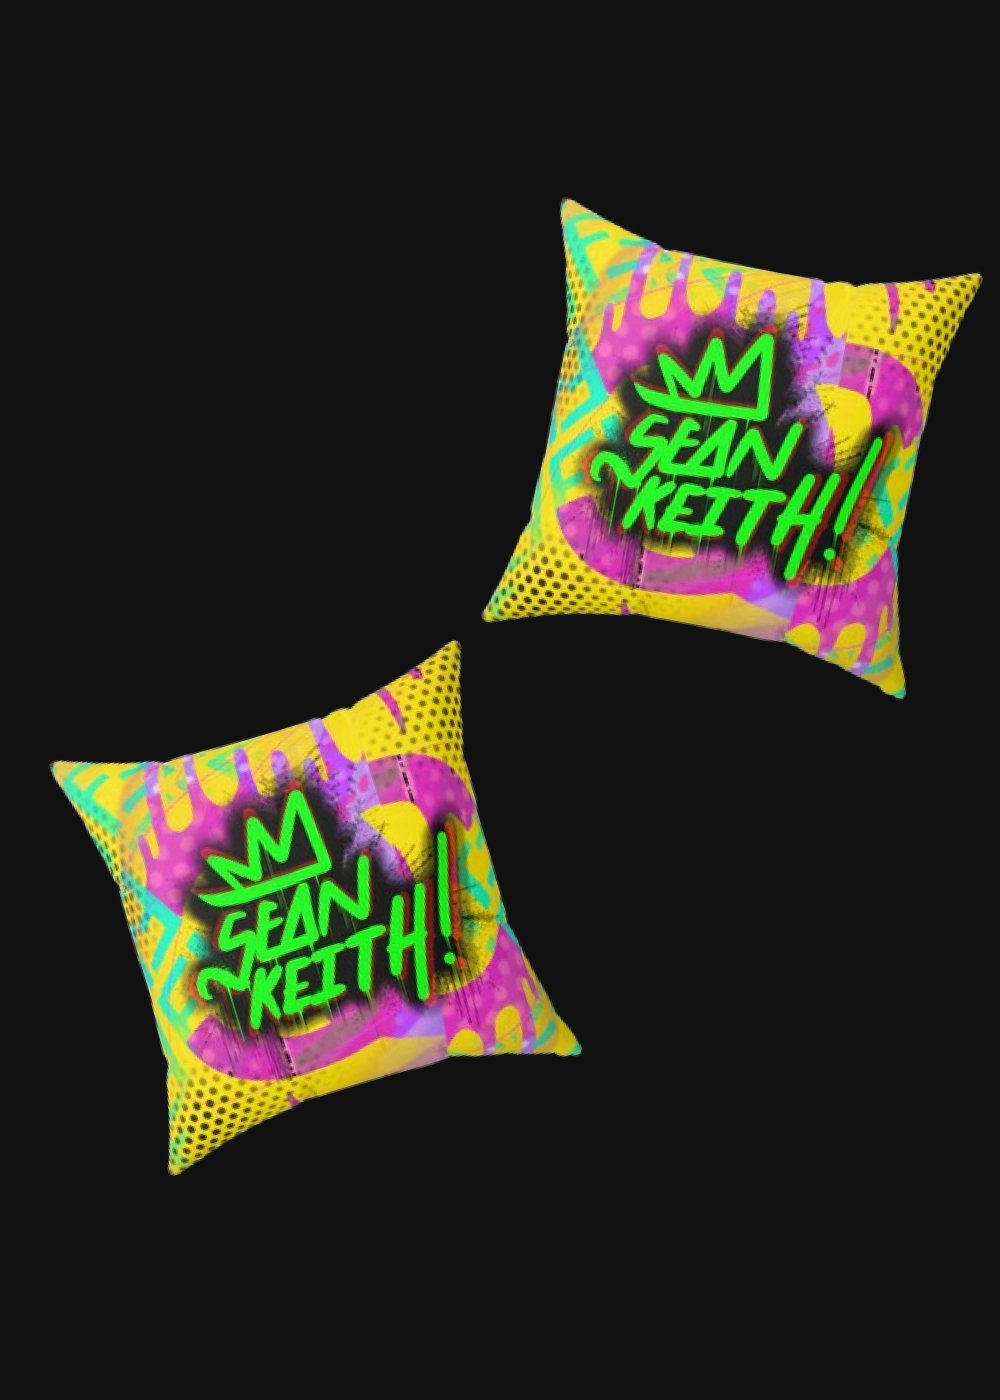 SK Polyester Square Pillow - Sean Keith Art